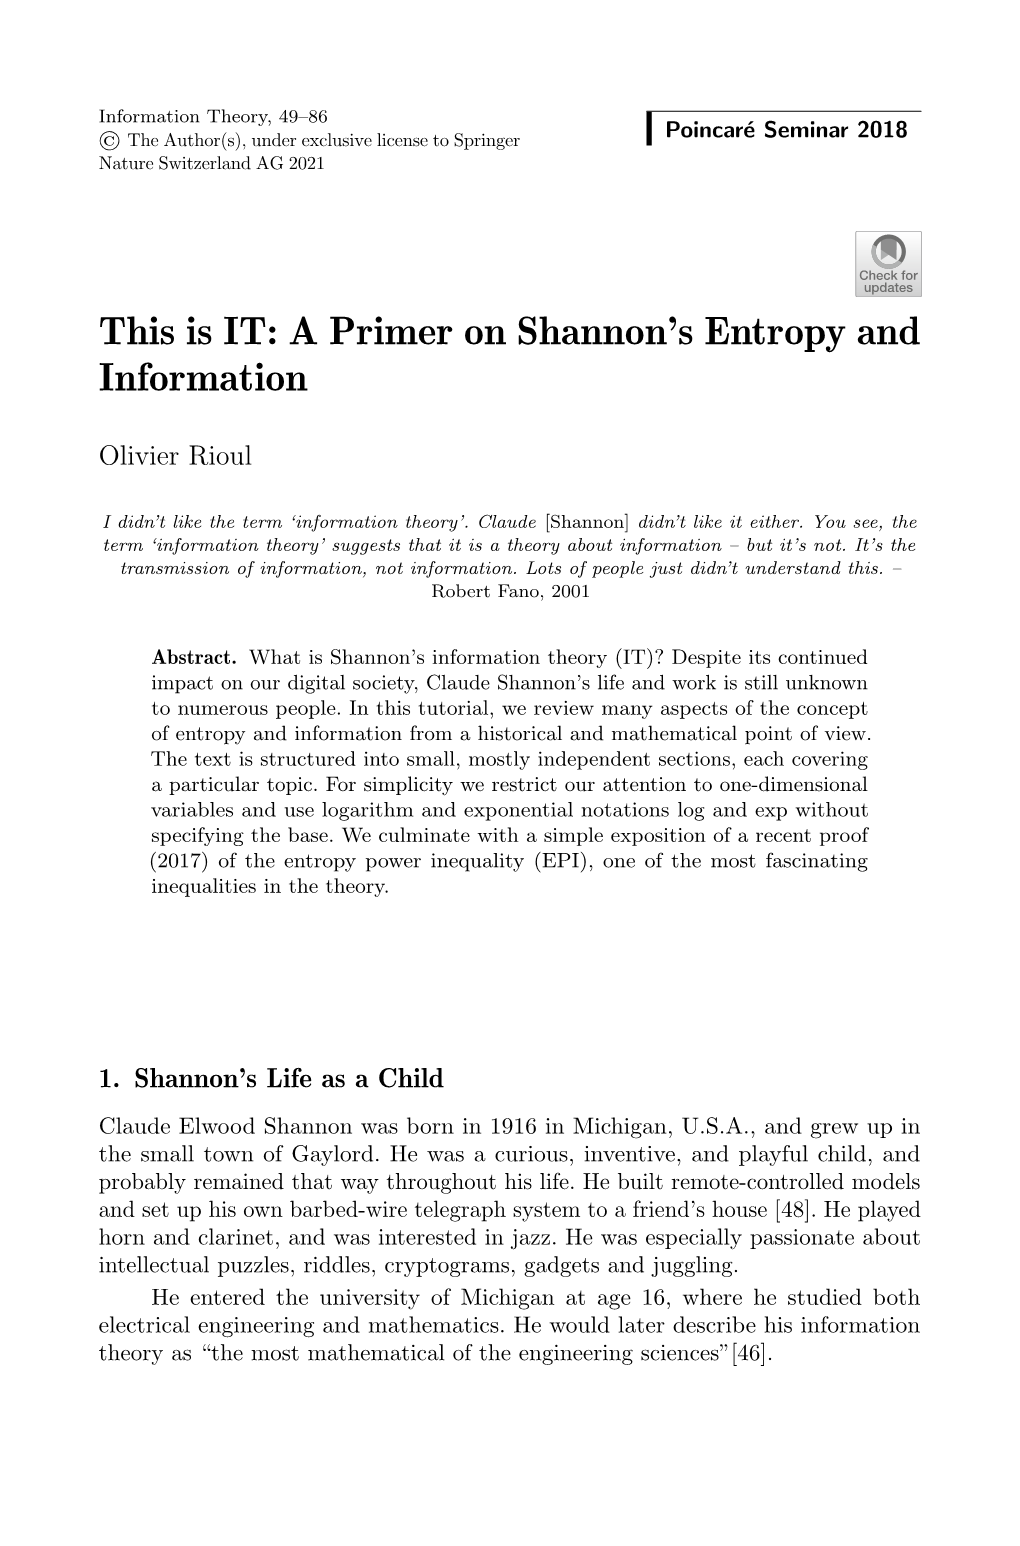 This Is IT: a Primer on Shannon's Entropy and Information